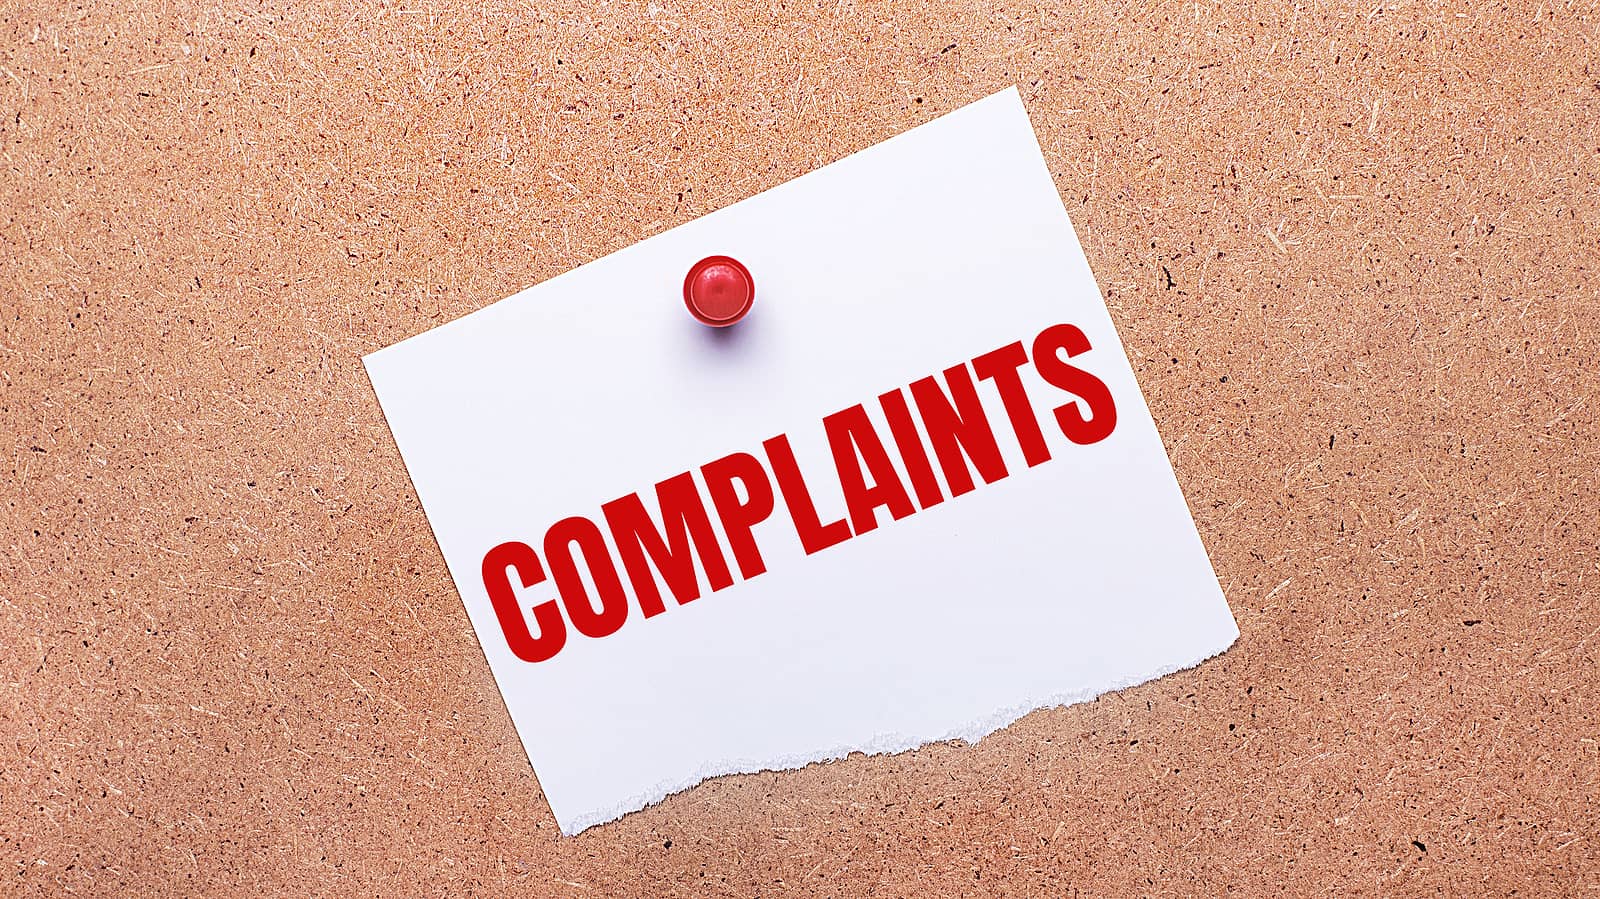 How to File a Complaint with Medicare